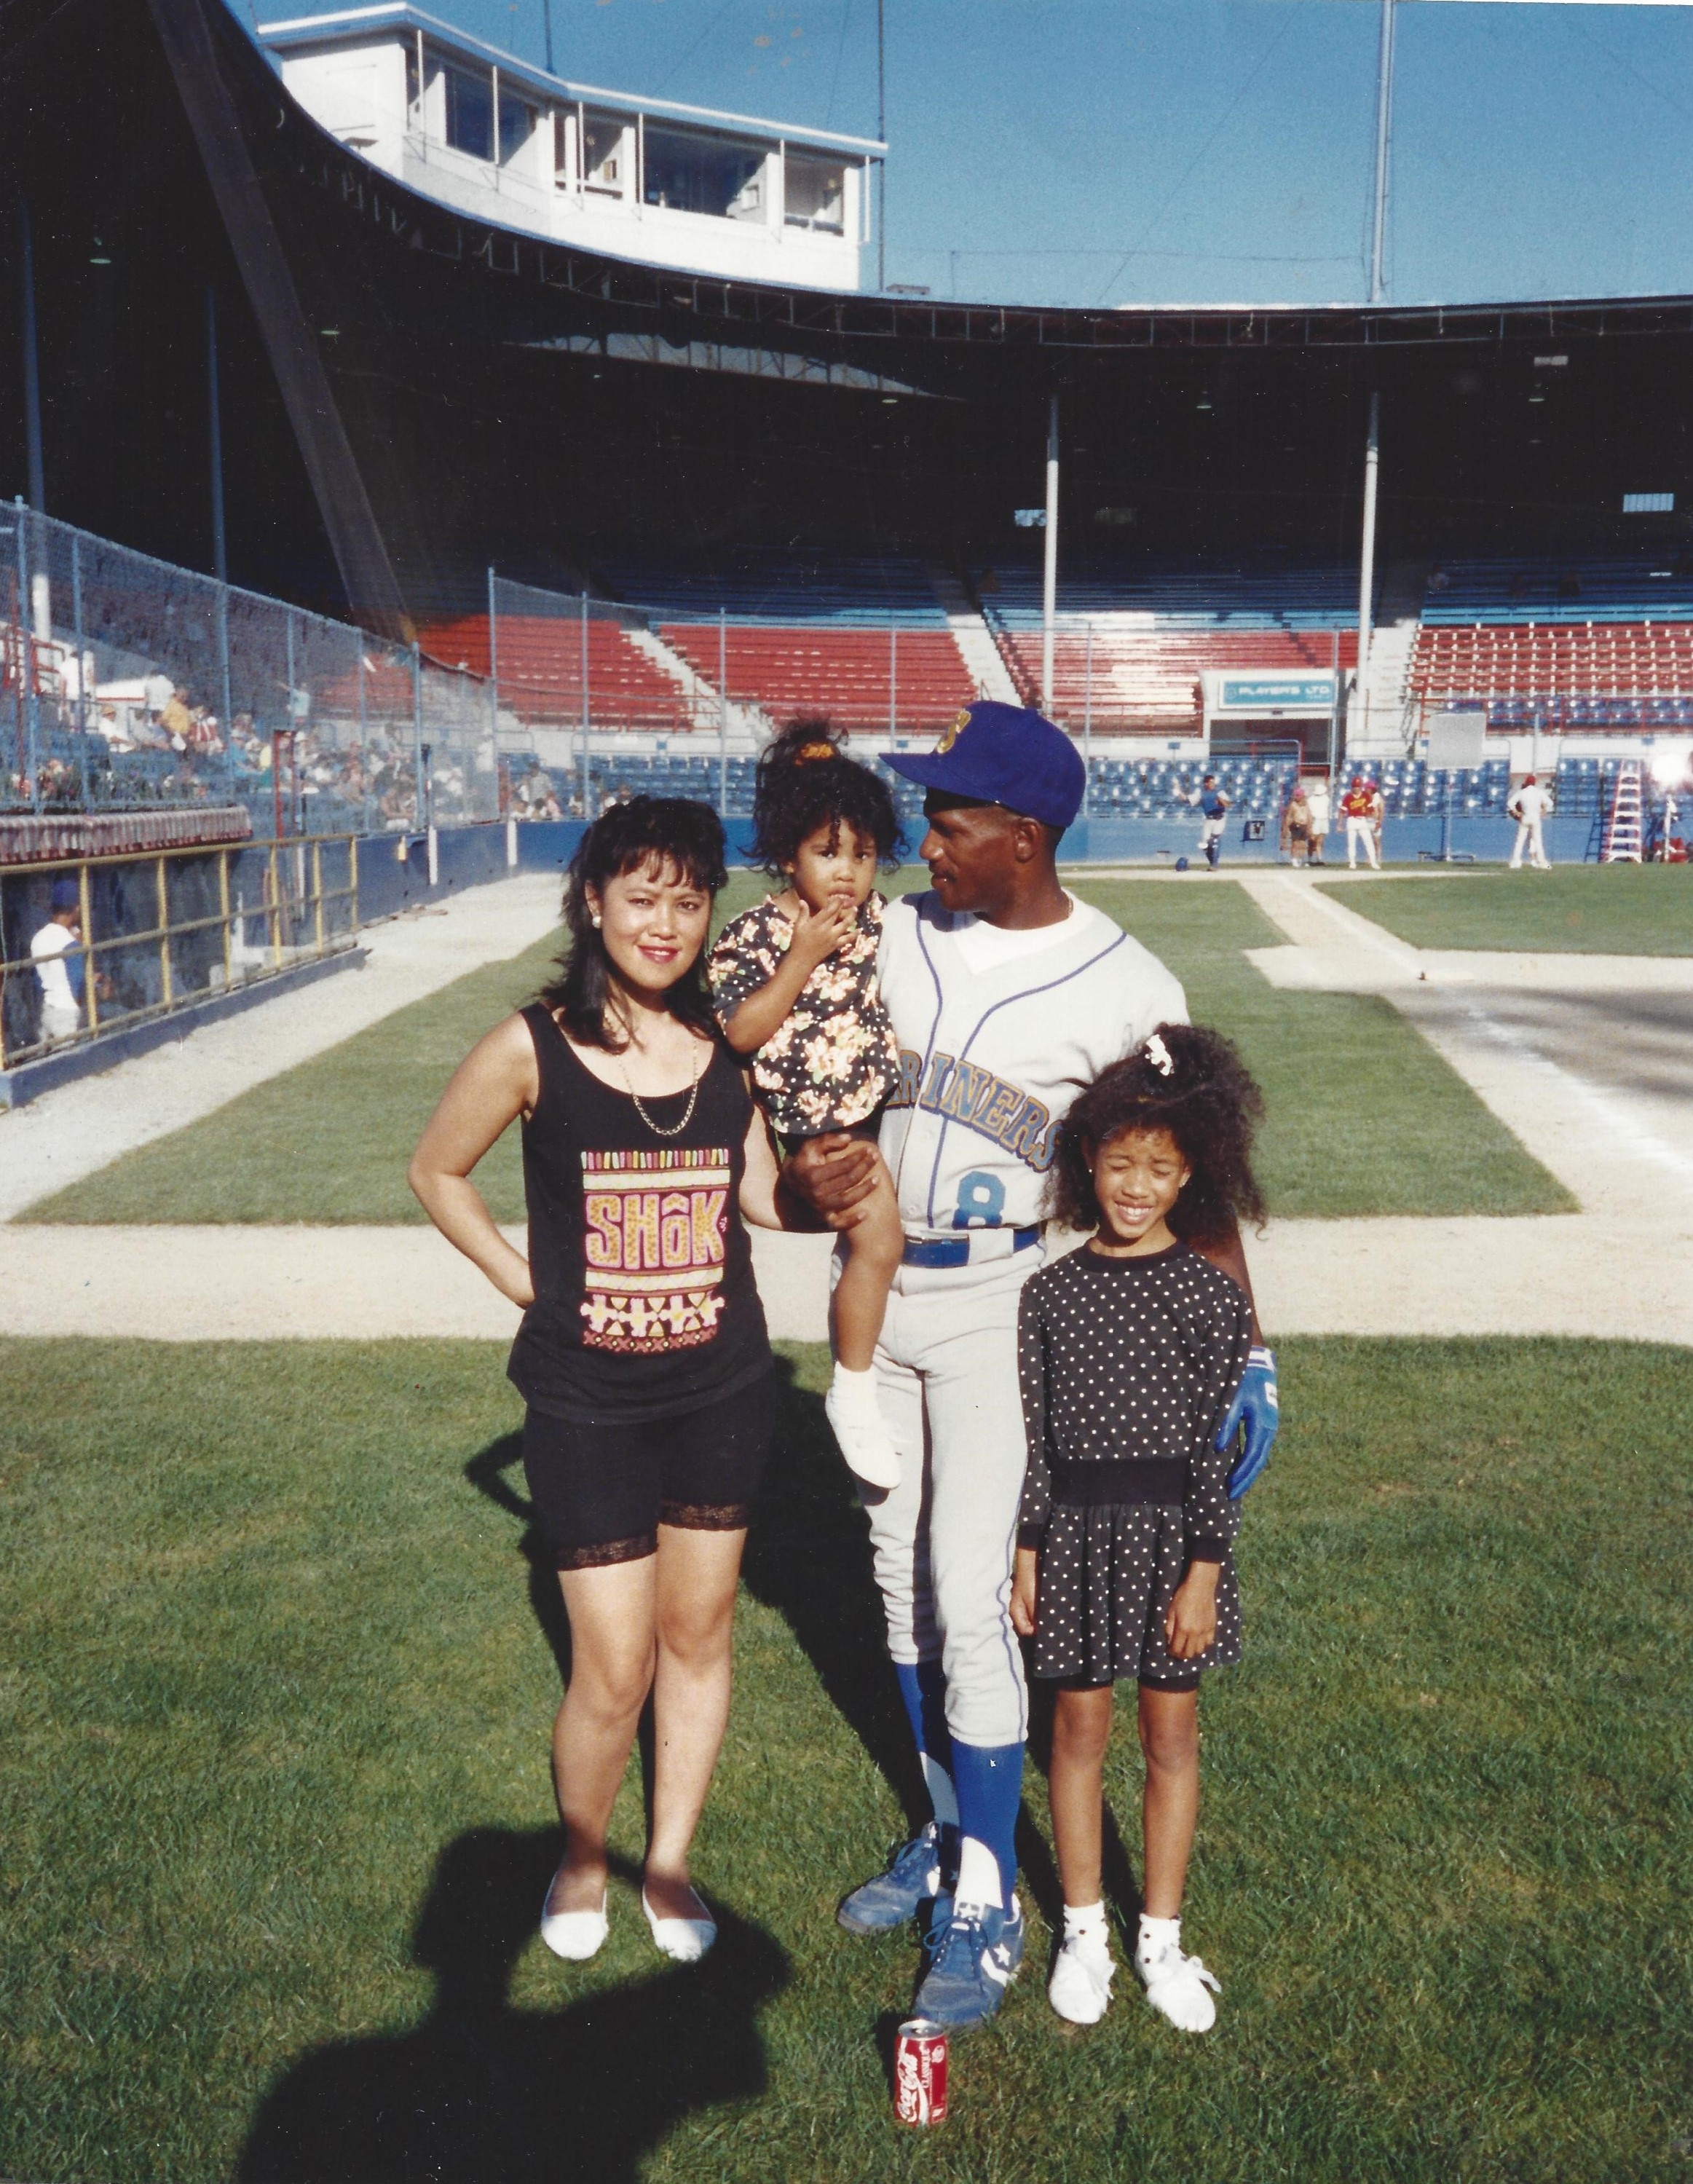 Me and my Fam at the Seattle Mariners tryout. Just kidding! I was working on the movie 